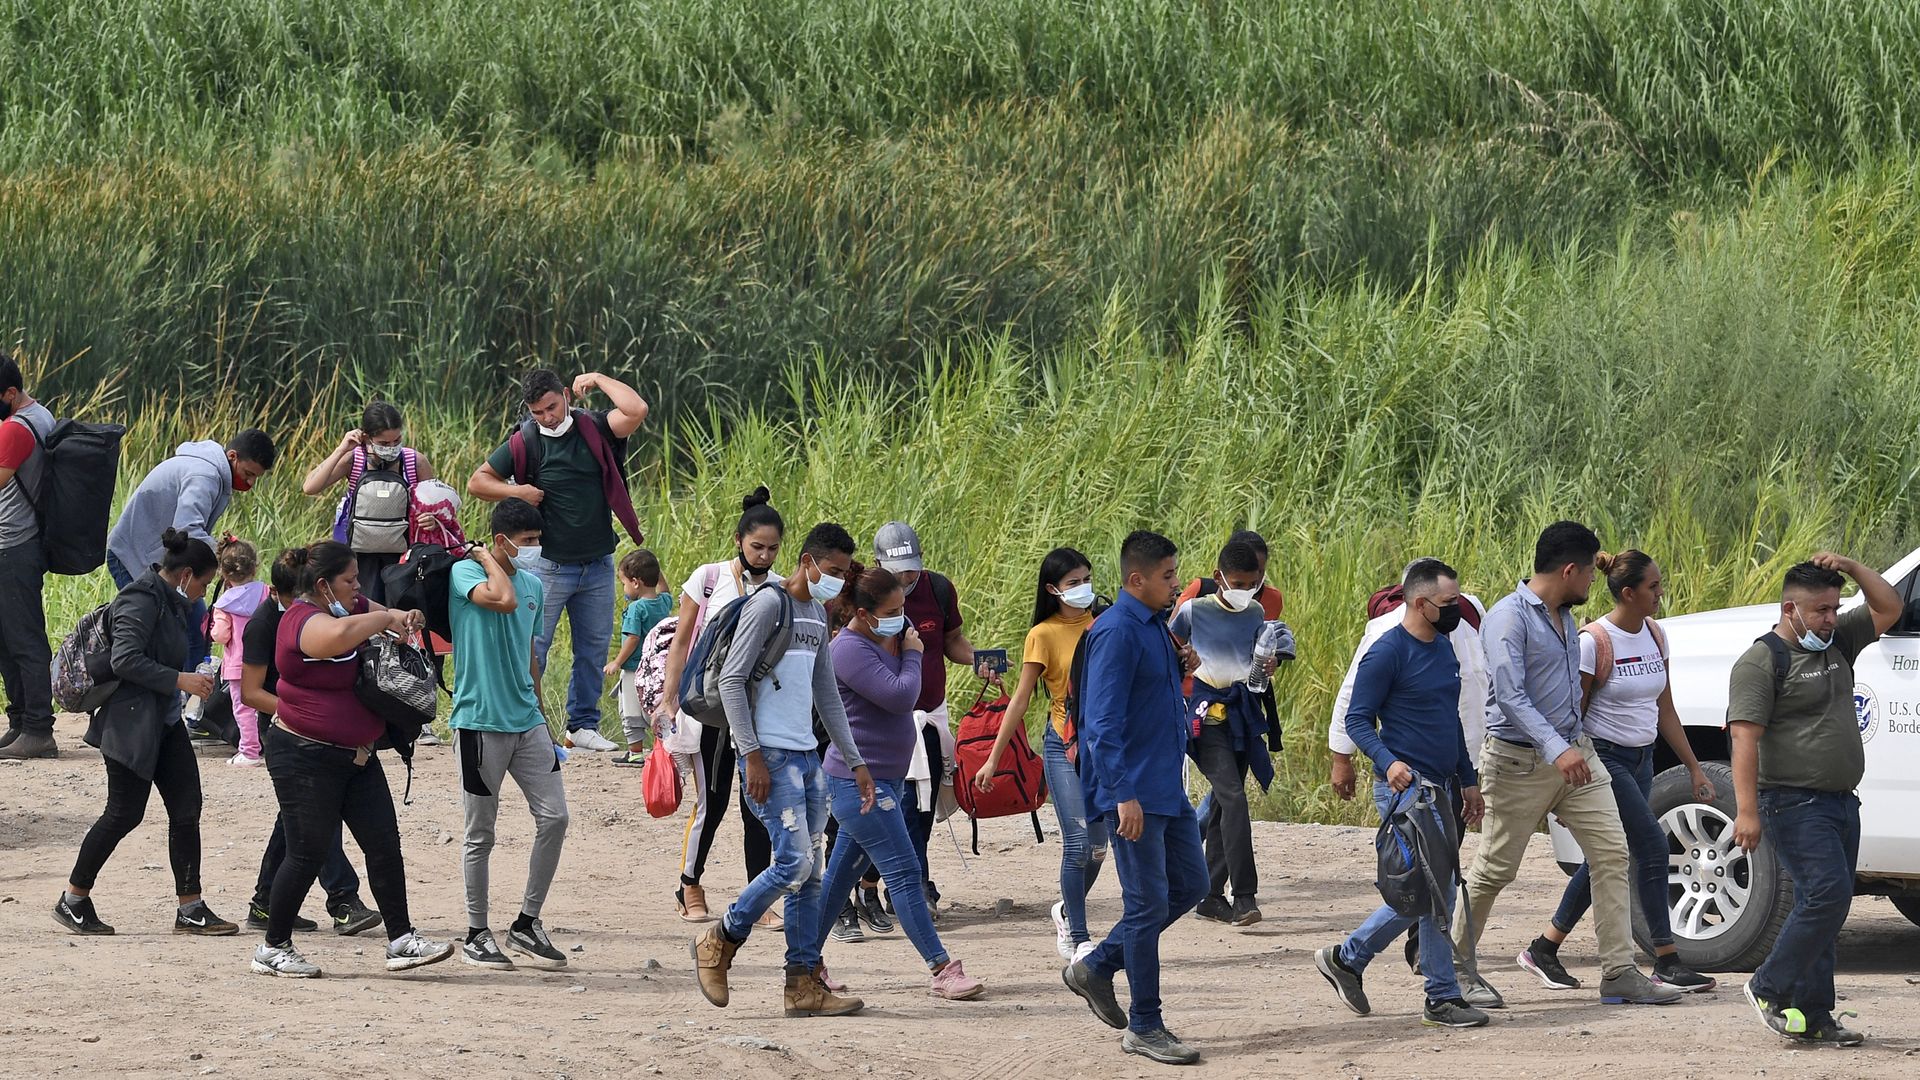 Migrants attempting to cross in to the U.S. from Mexico are detained by U.S. Customs and Border Protection at the border